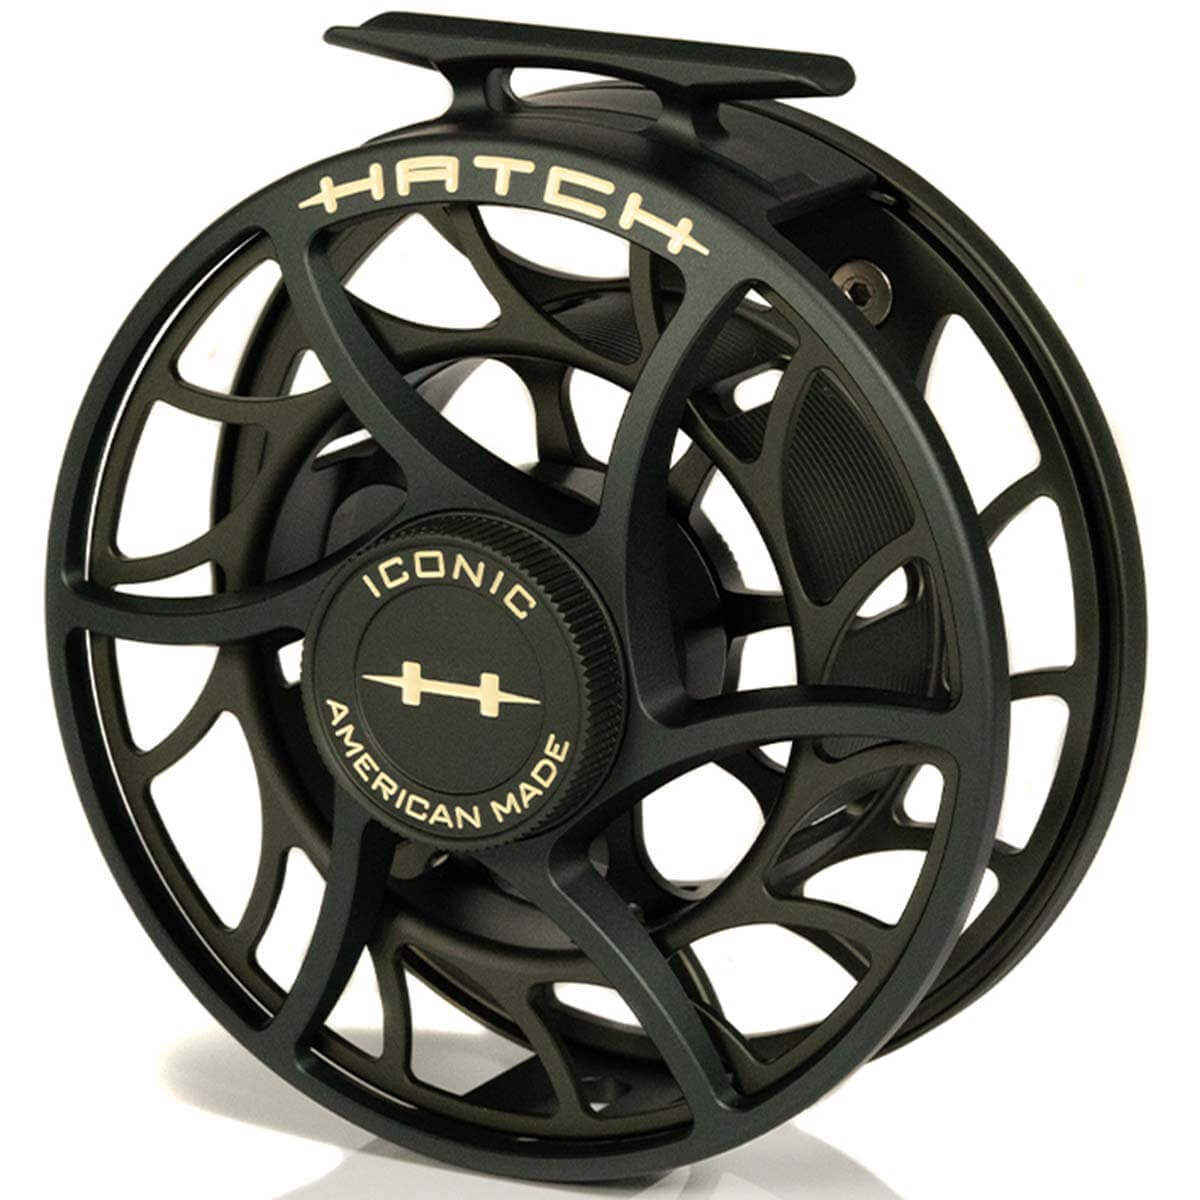 Limited Run Gargoyle Color Way for Hatch Iconic Reels and Pliers  #flyfishing #flytying #hatchreels 